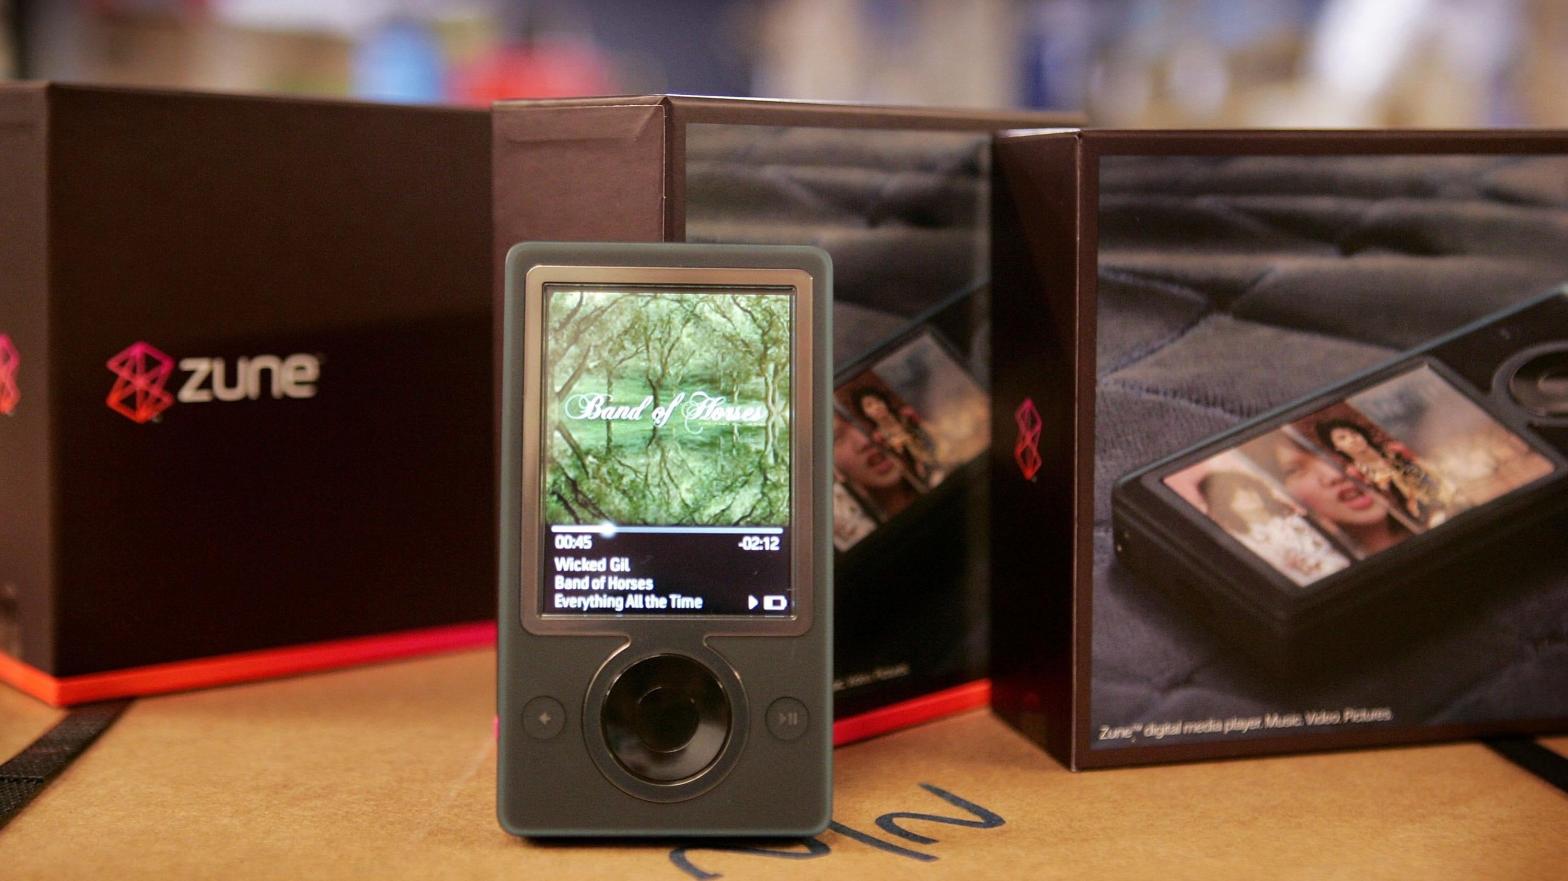 A new Zune portable digital music player. (Photo: Scott Olson, Getty Images)